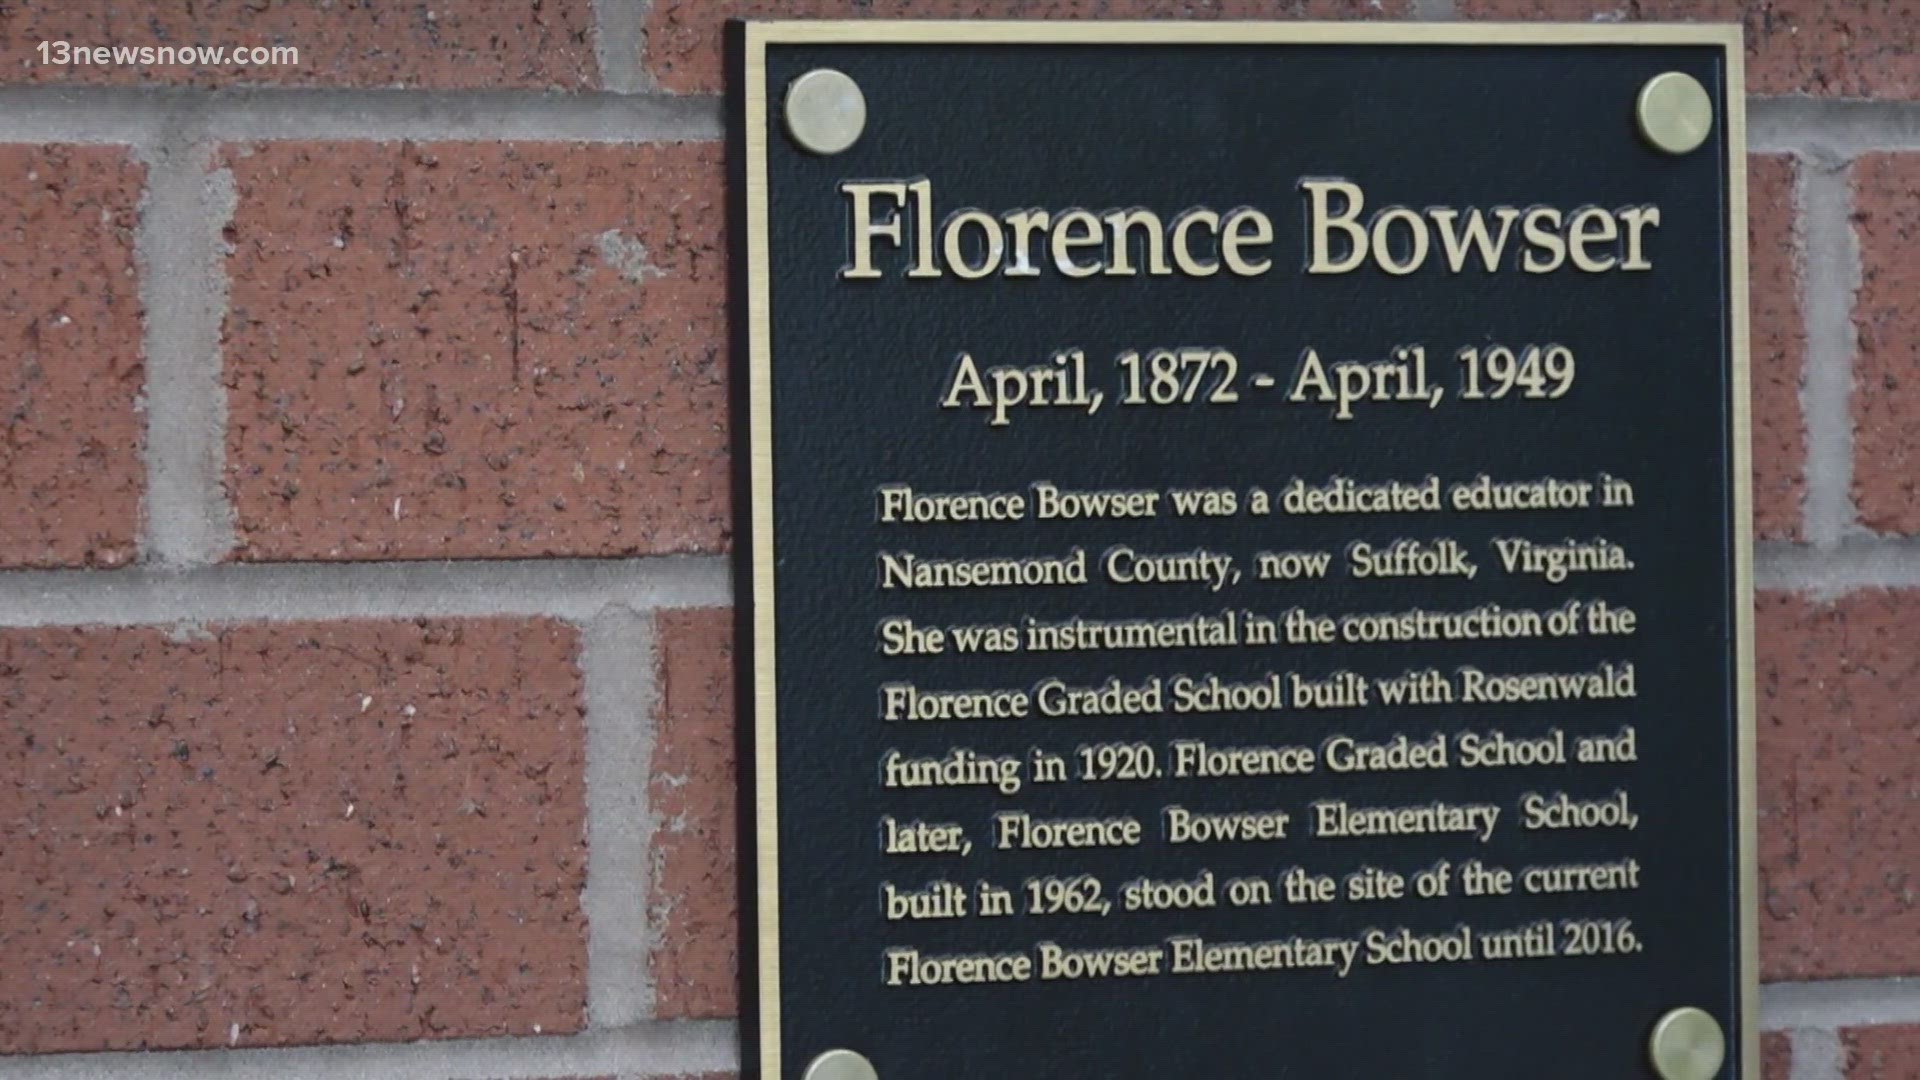 On Friday, descendants of Florence Bowser will hold a ceremony for a new historical marker outside the Suffolk school named in her honor.